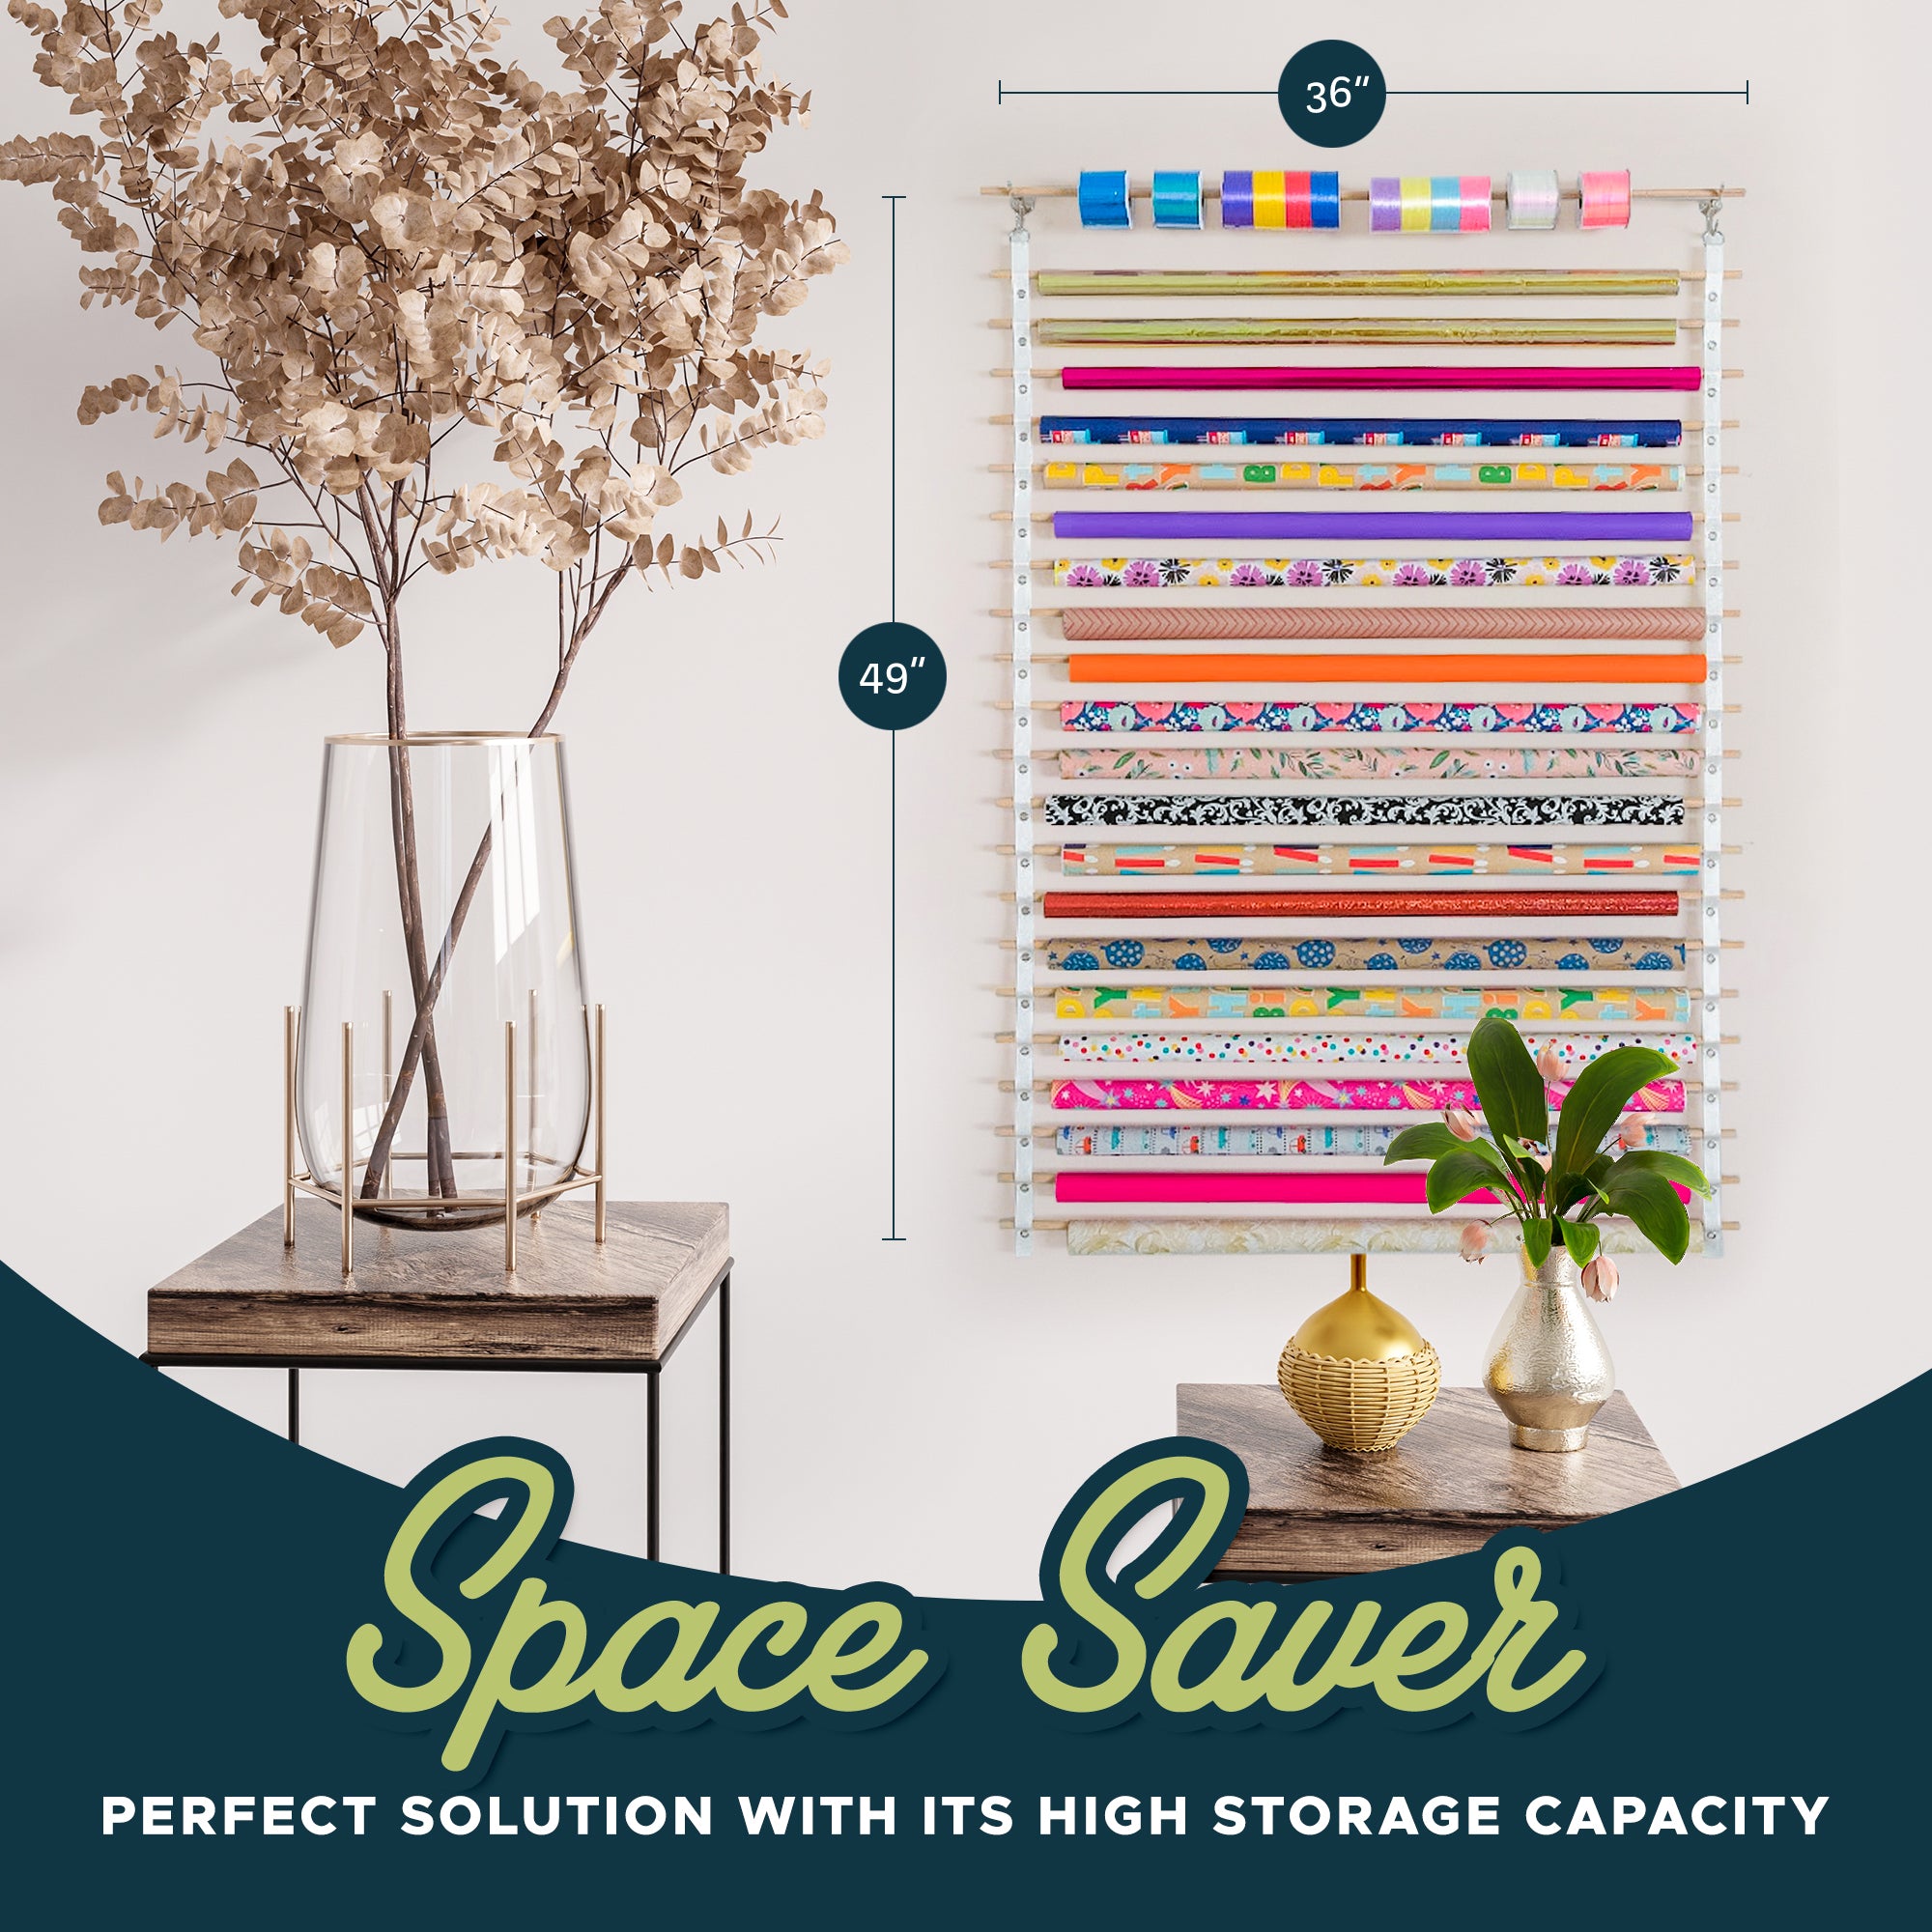 Gift Wrap Storage Ideas - The Message in the Mess